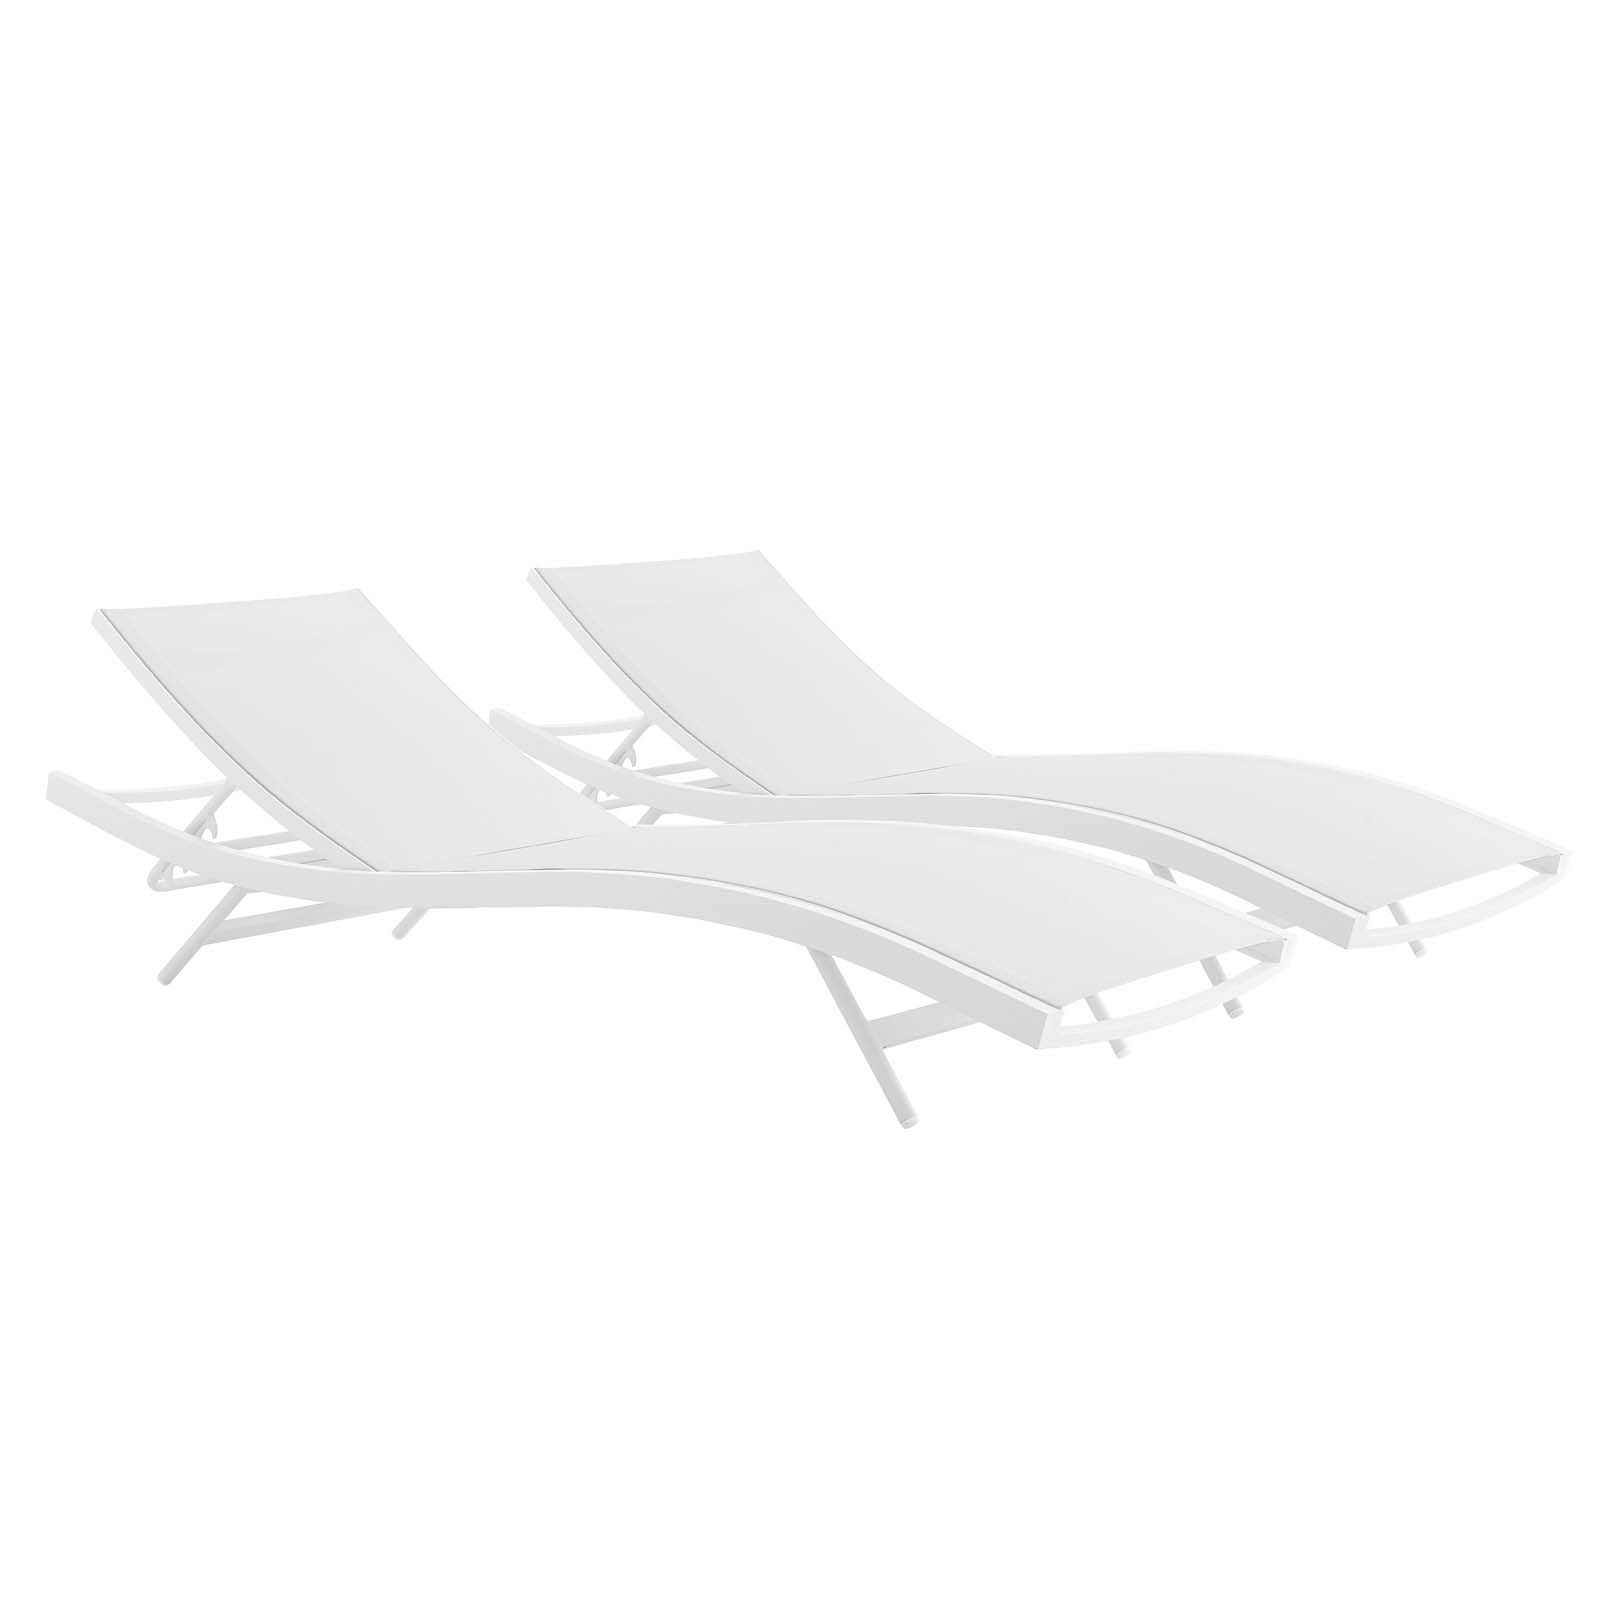 Glimpse Outdoor Patio Mesh Chaise Lounge Set Of 2 White For White Fabric Outdoor Patio Sets (View 8 of 15)